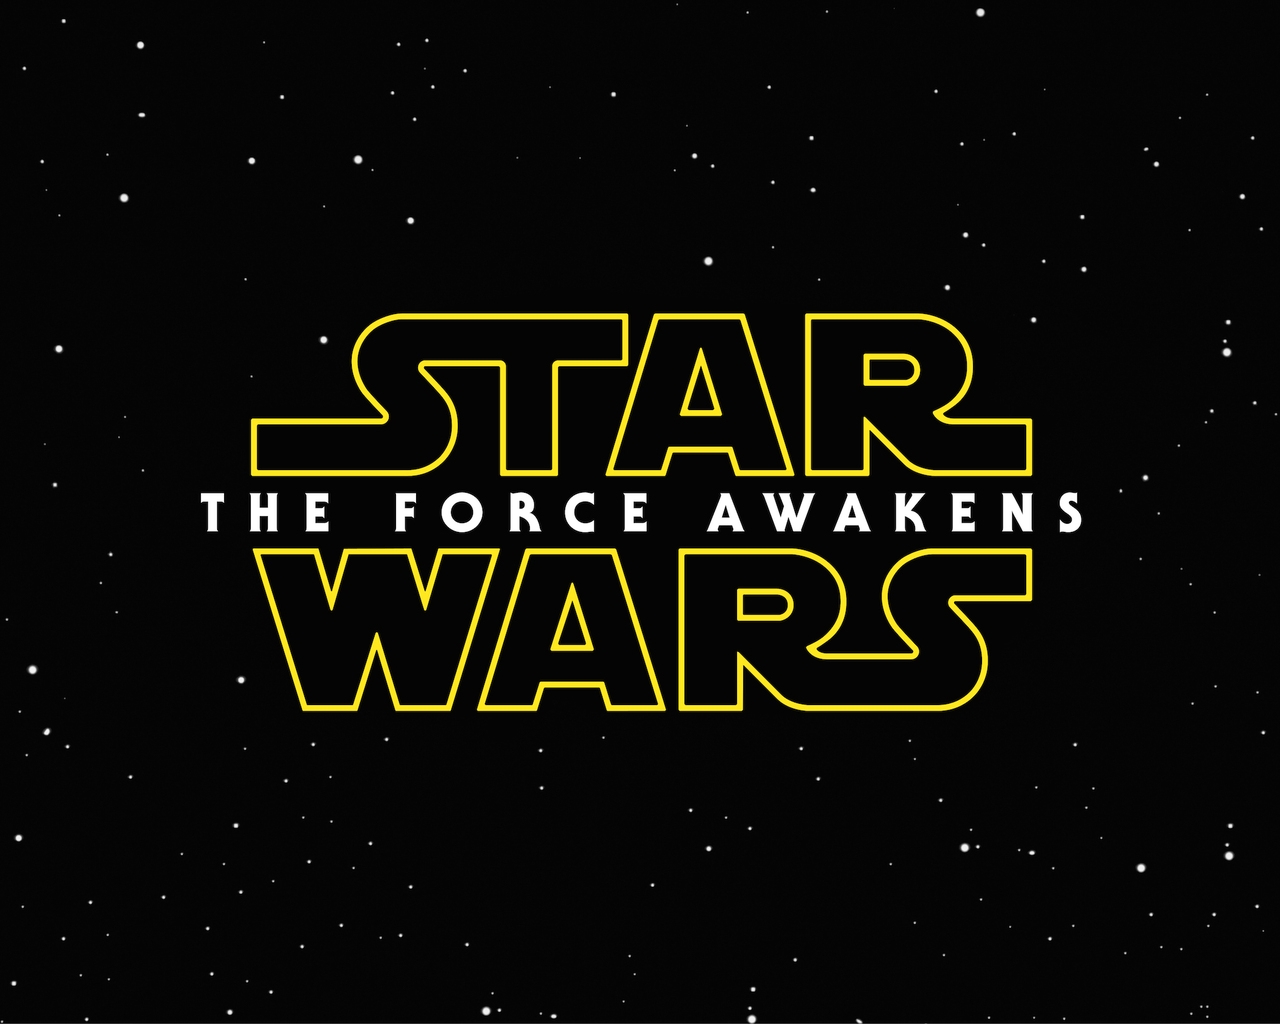 Star Wars The Force Awakens Logo for 1280 x 1024 resolution